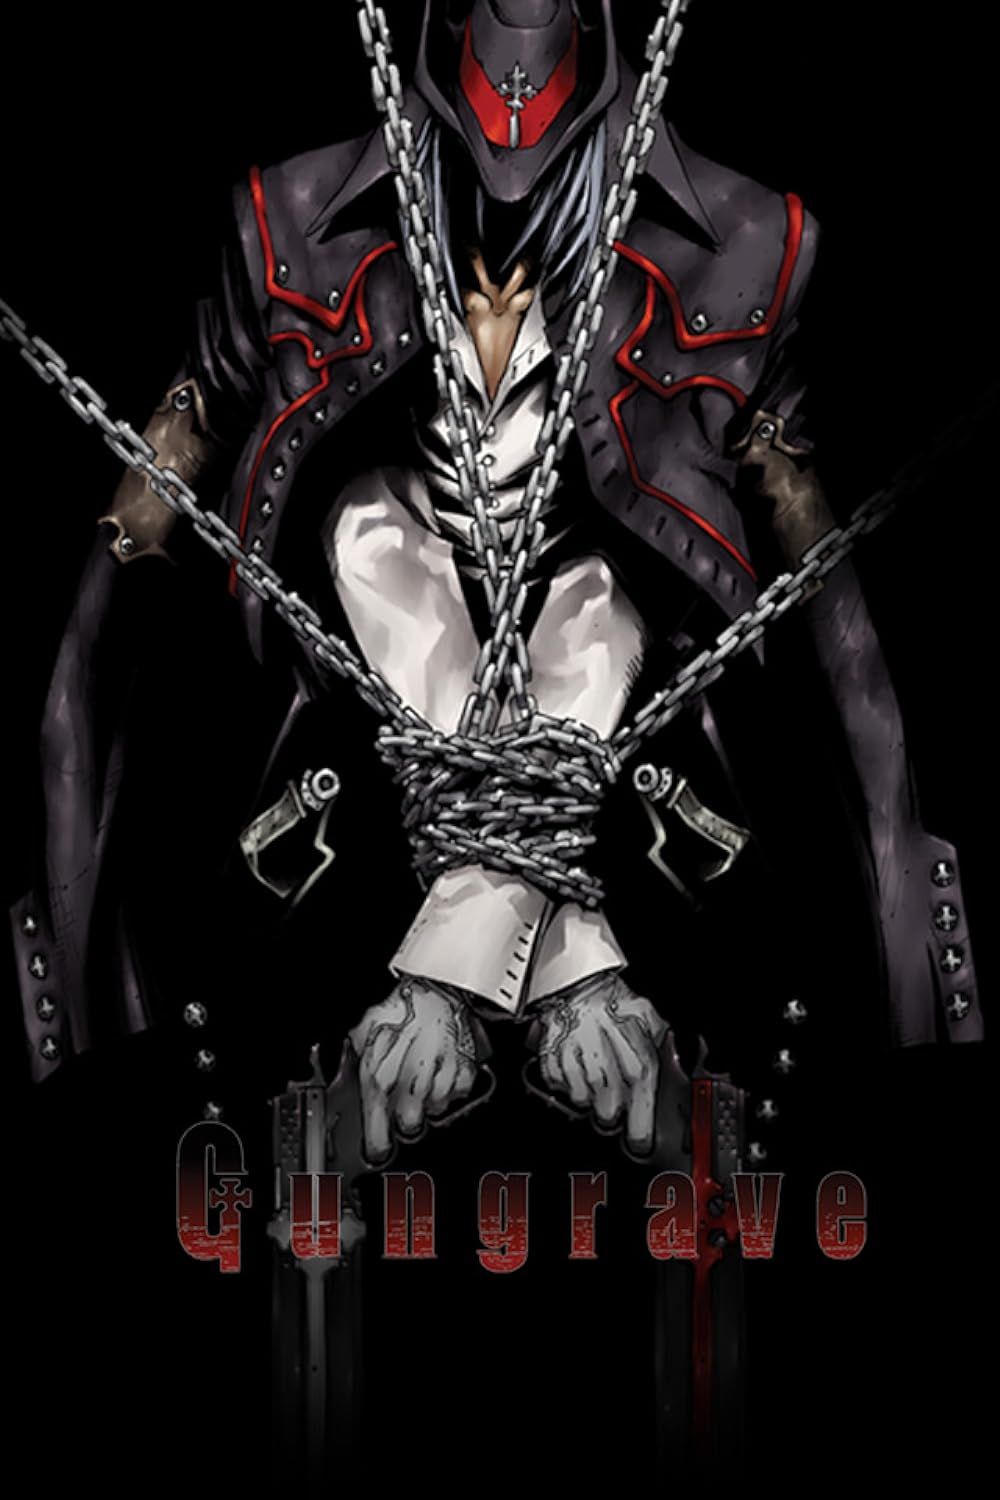 A chained man holding guns on the poster of Gungrave